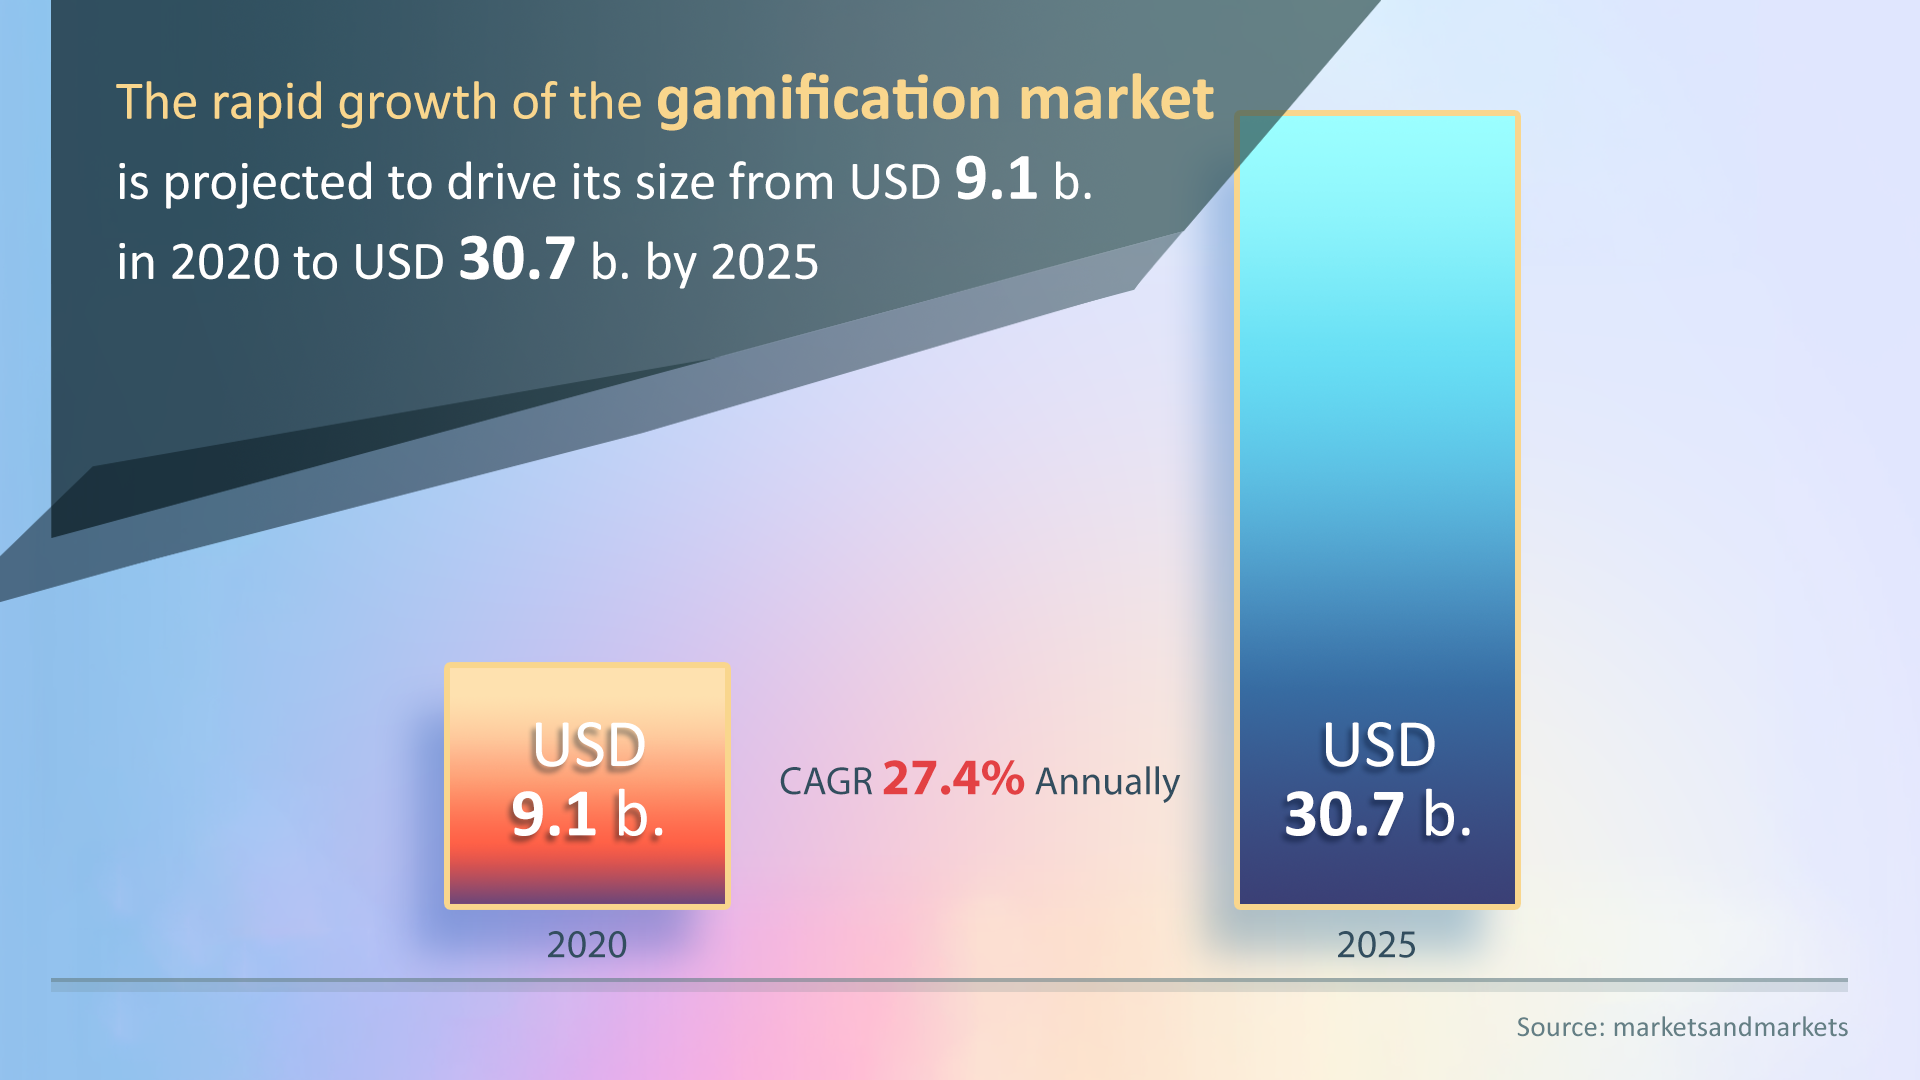 The Exploding Gaming Trend: Students Devote Time and Money, Pushing Gamification Market to Soar 27.4% Annually, the rapid growth of the gamification market is projected to drive its size from USD 9.1 b. in 2020 to USD 30.7 b. by 2025